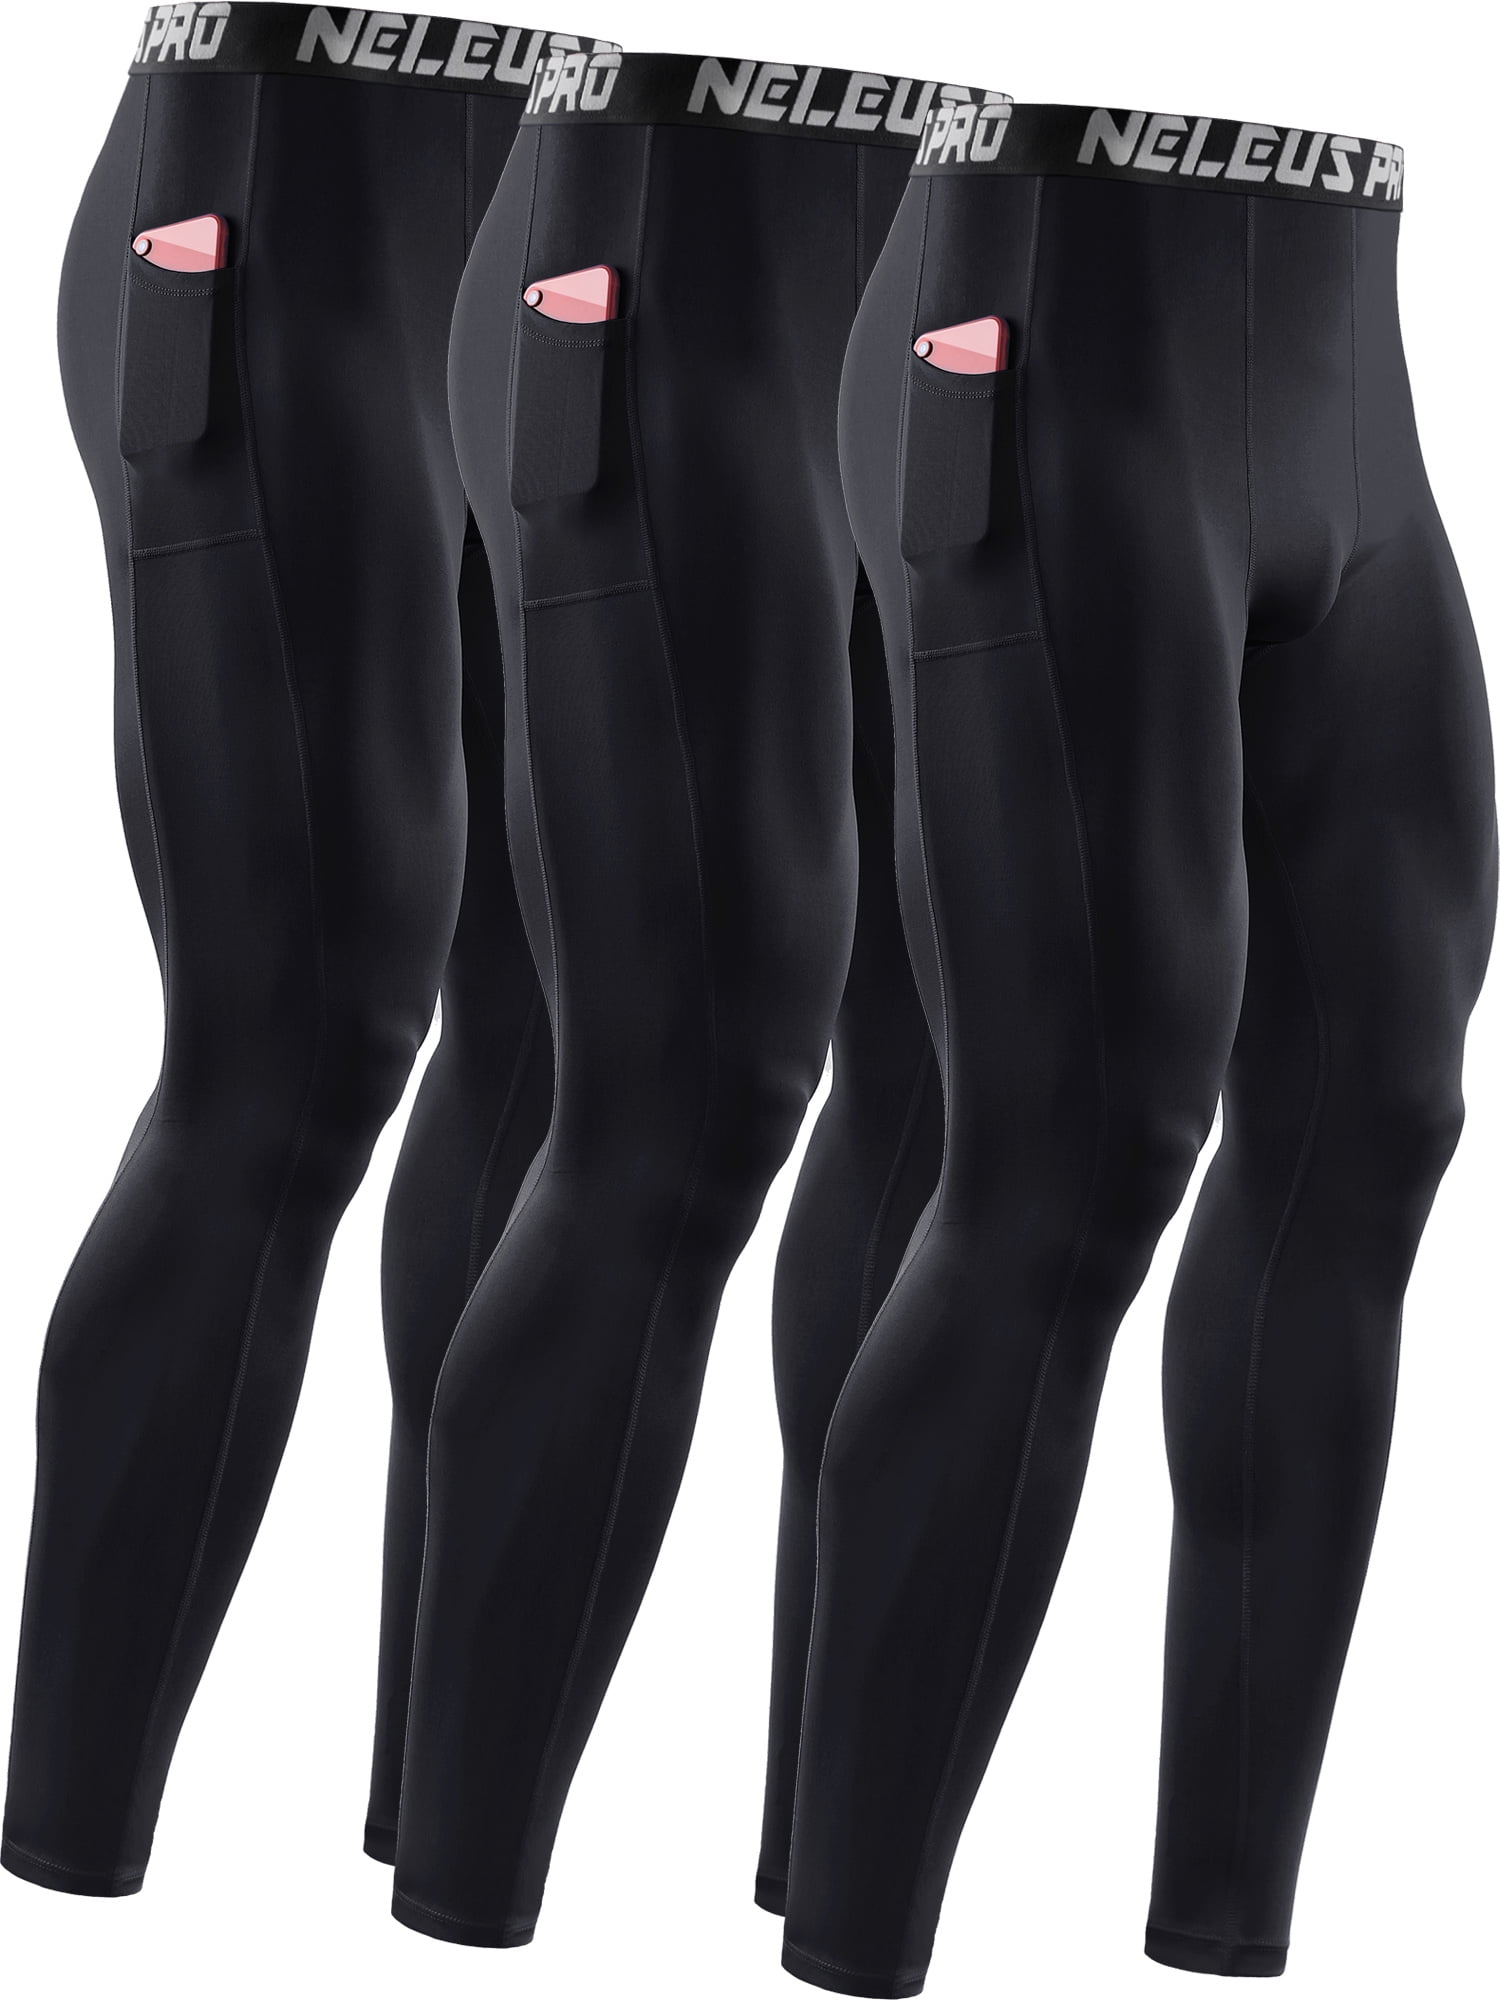 Nike Fast Tights Black/Reflective Silver 